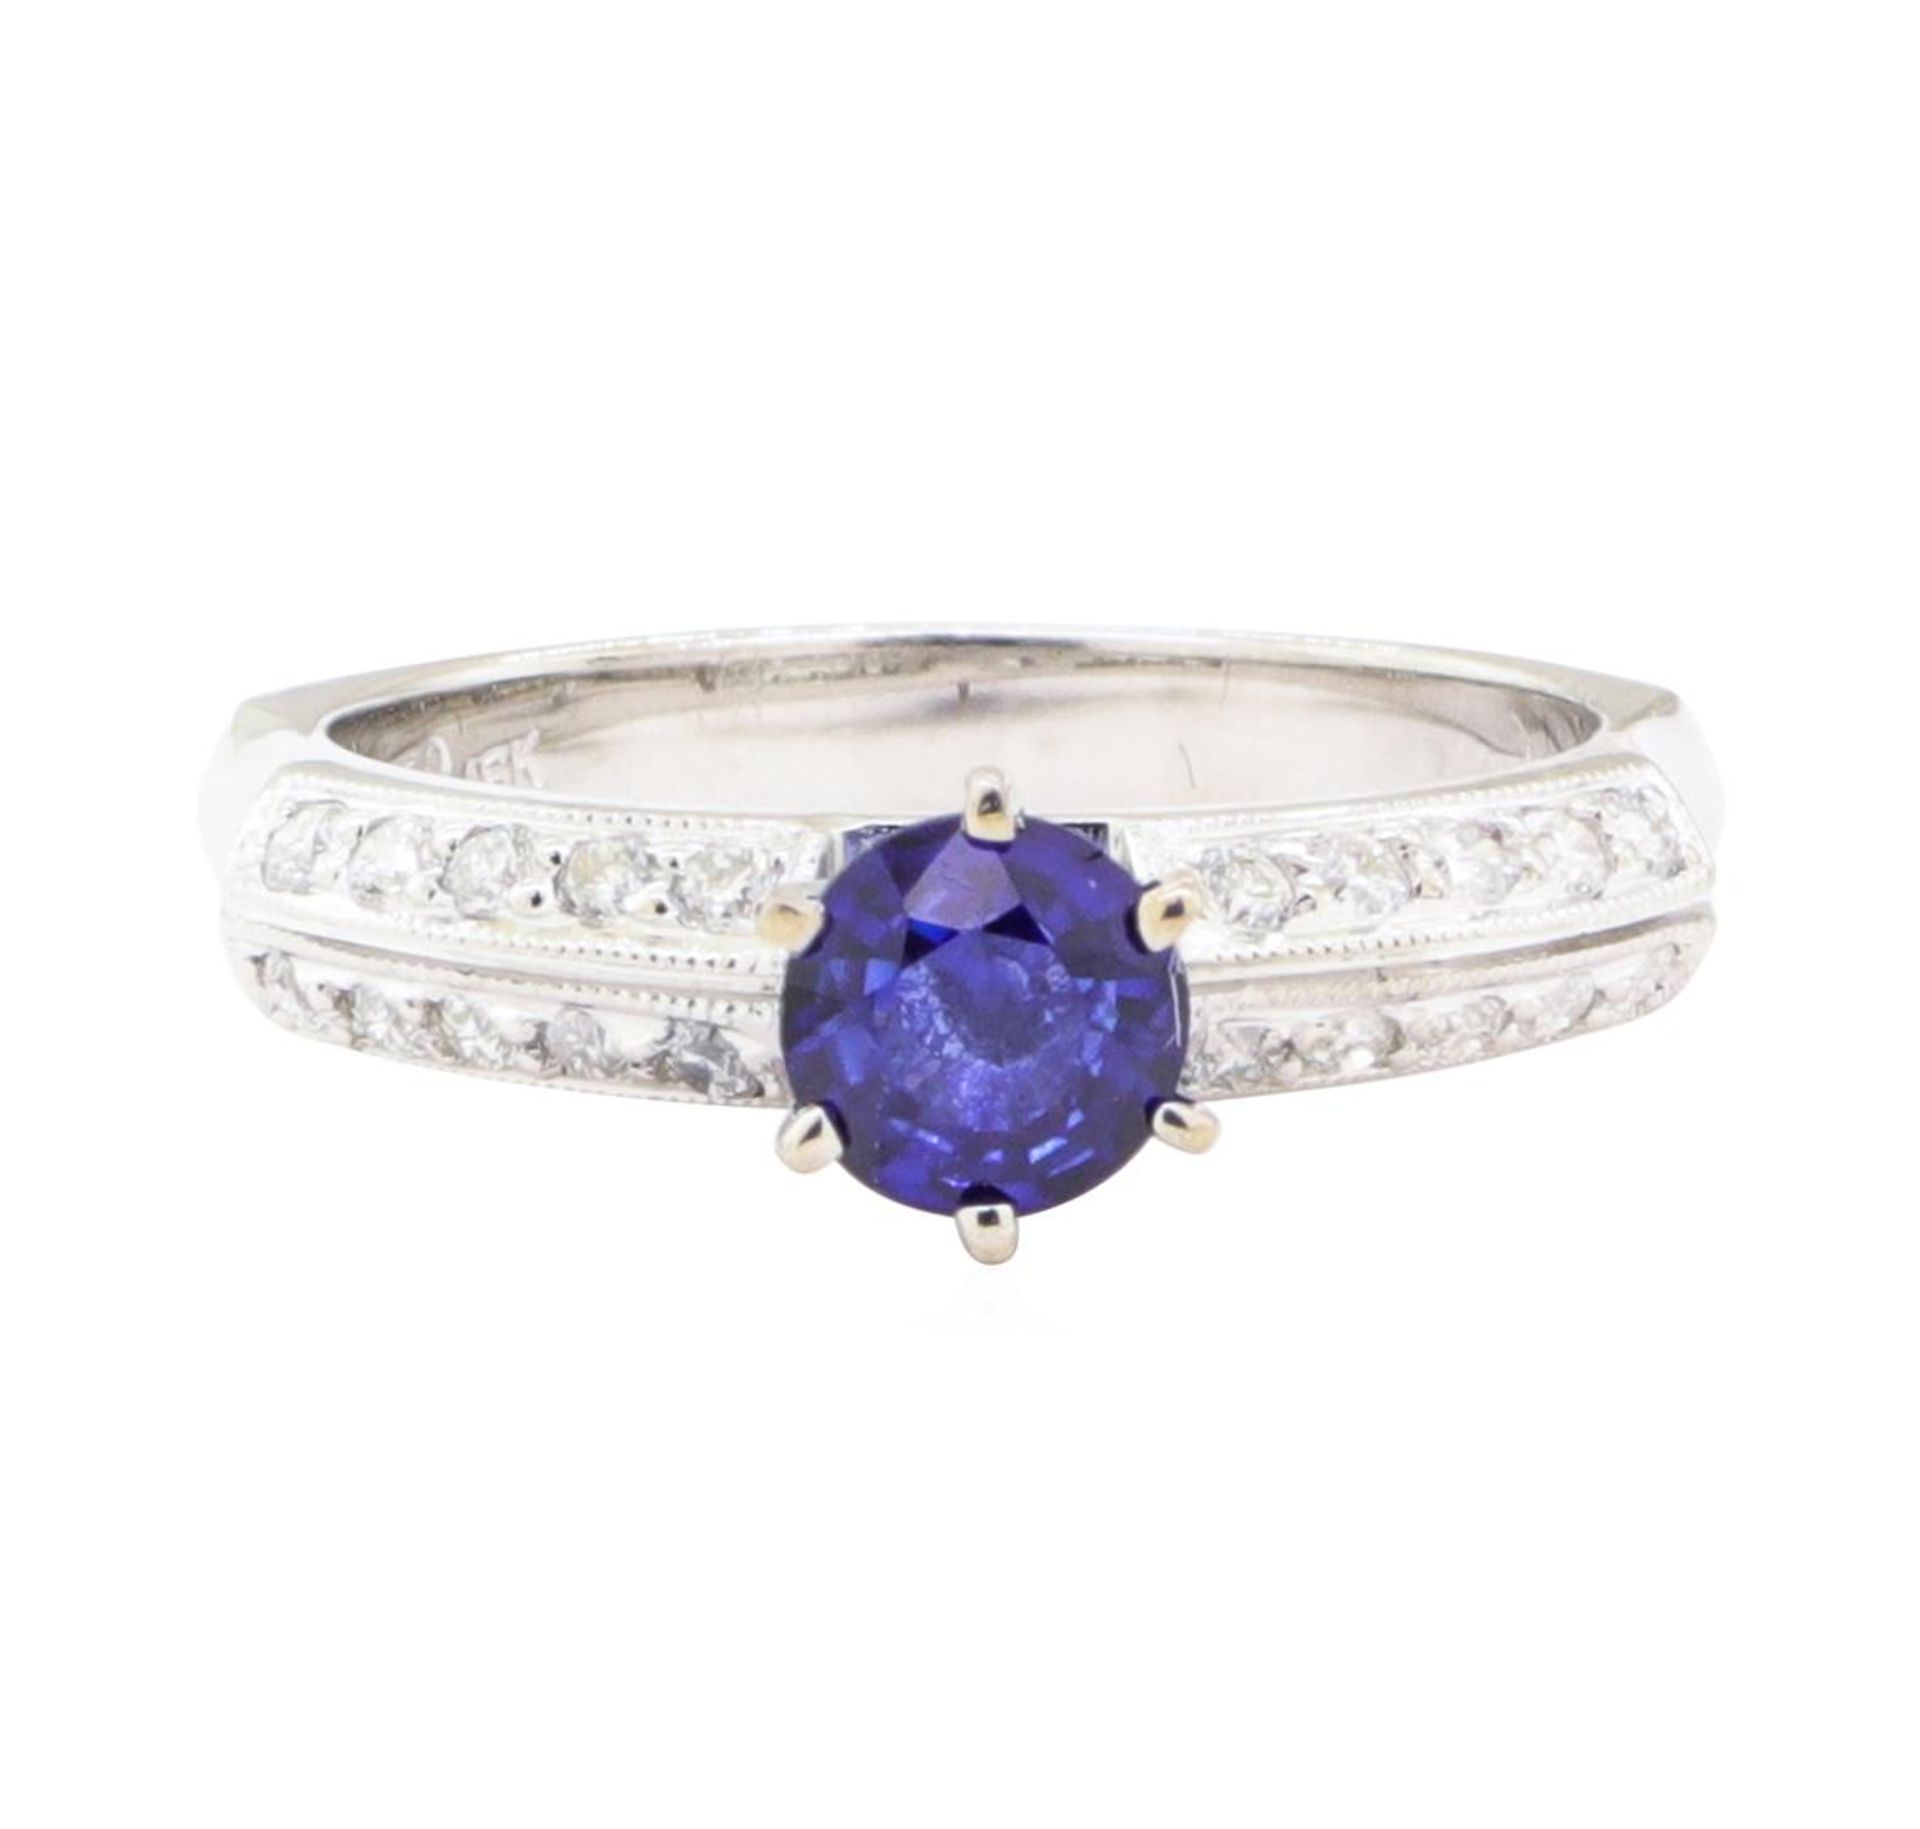 0.95 ctw Sapphire And Diamond Ring - 18KT White Gold - Image 2 of 5